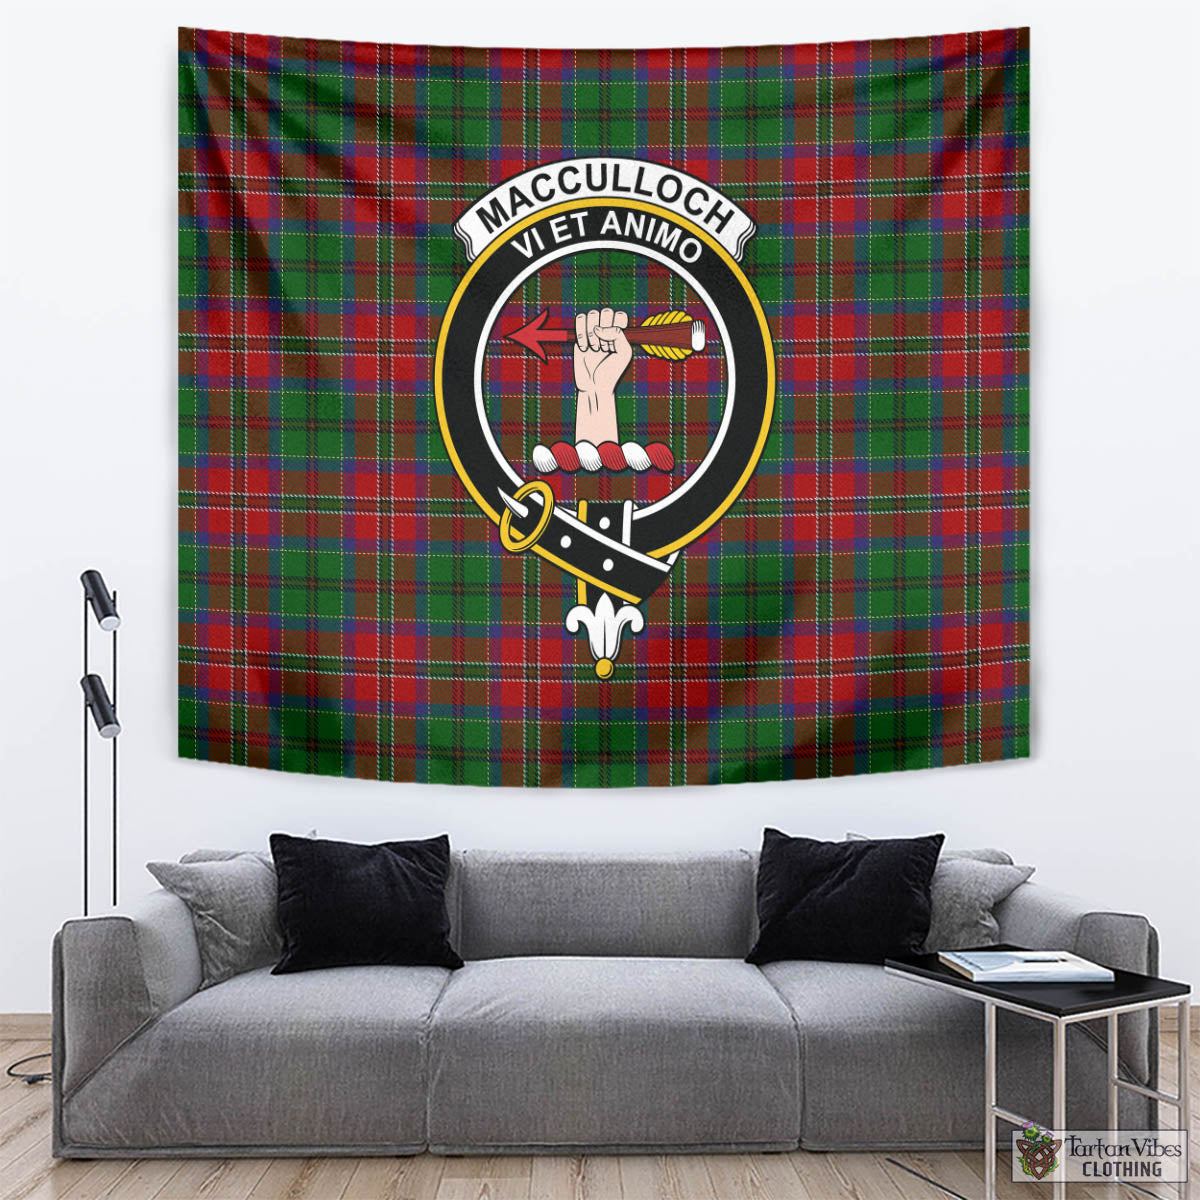 Tartan Vibes Clothing MacCulloch Tartan Tapestry Wall Hanging and Home Decor for Room with Family Crest